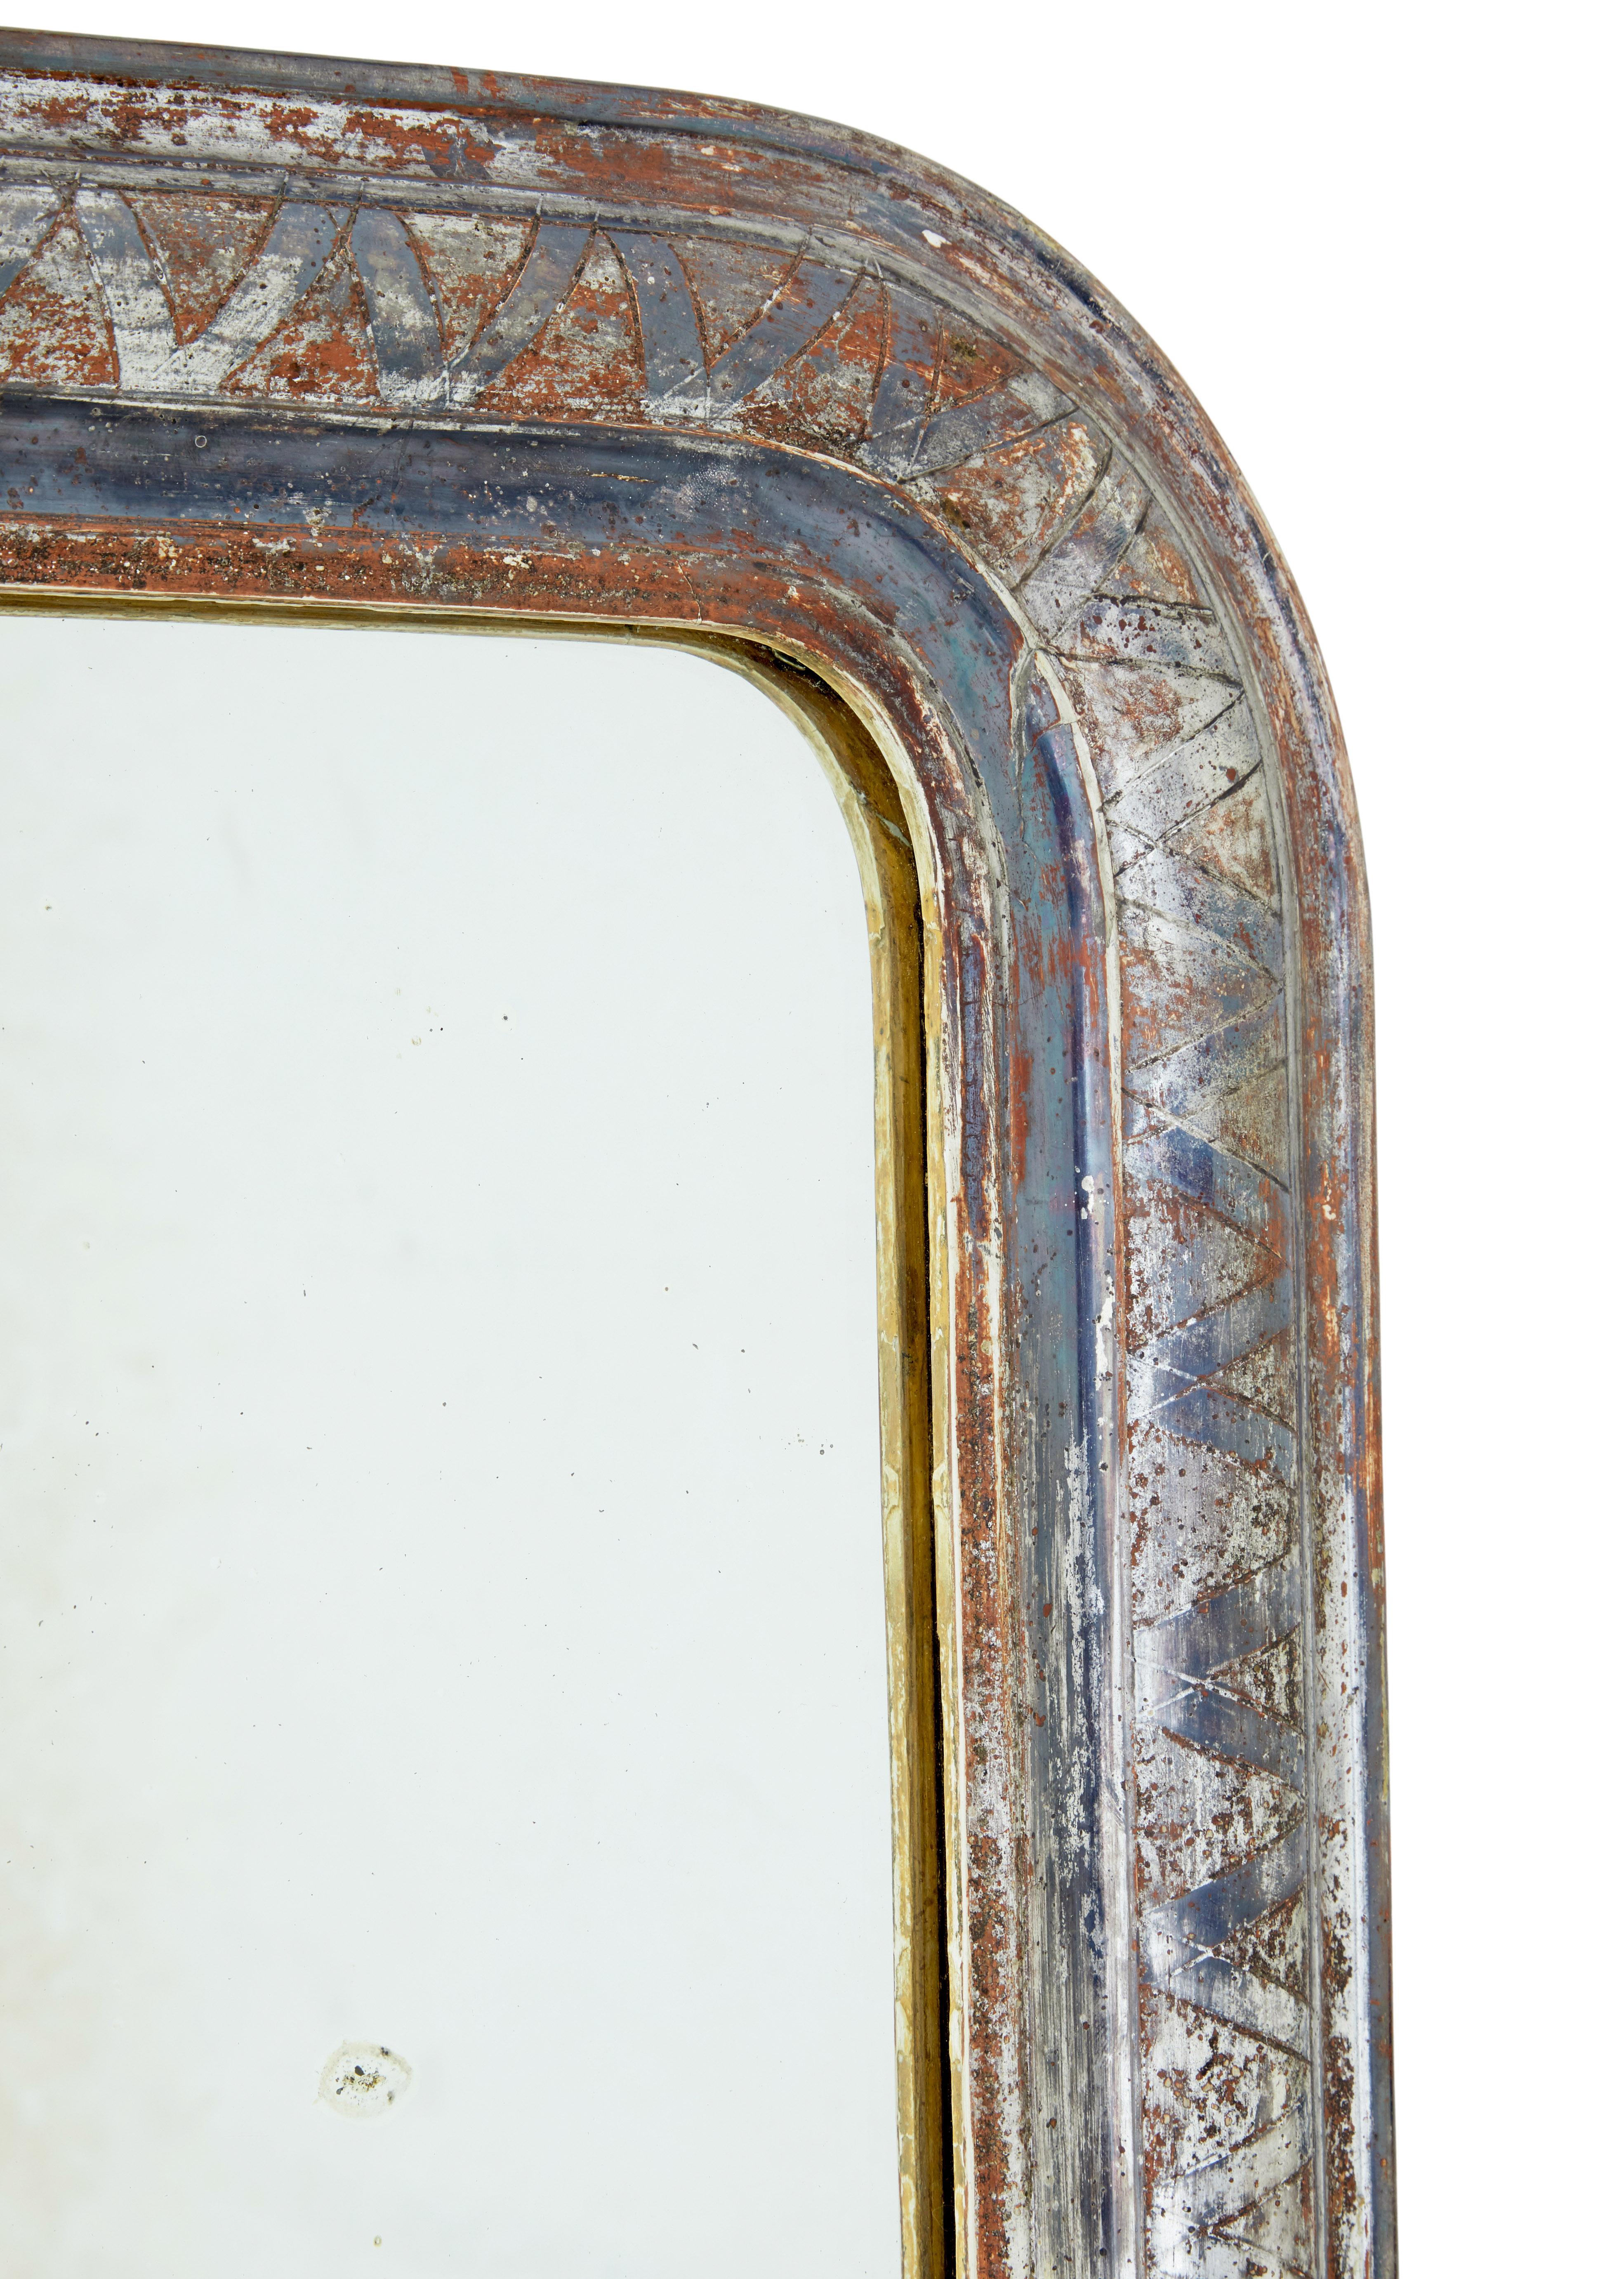 Silver gilt patterned wall mirror, circa 1920.

Originally decorated with silver gilt which has since been rubbed back to its current distressed appearance. Rounded top edge with shaped slip.

Expected minor plate losses to mirror, marks to wood